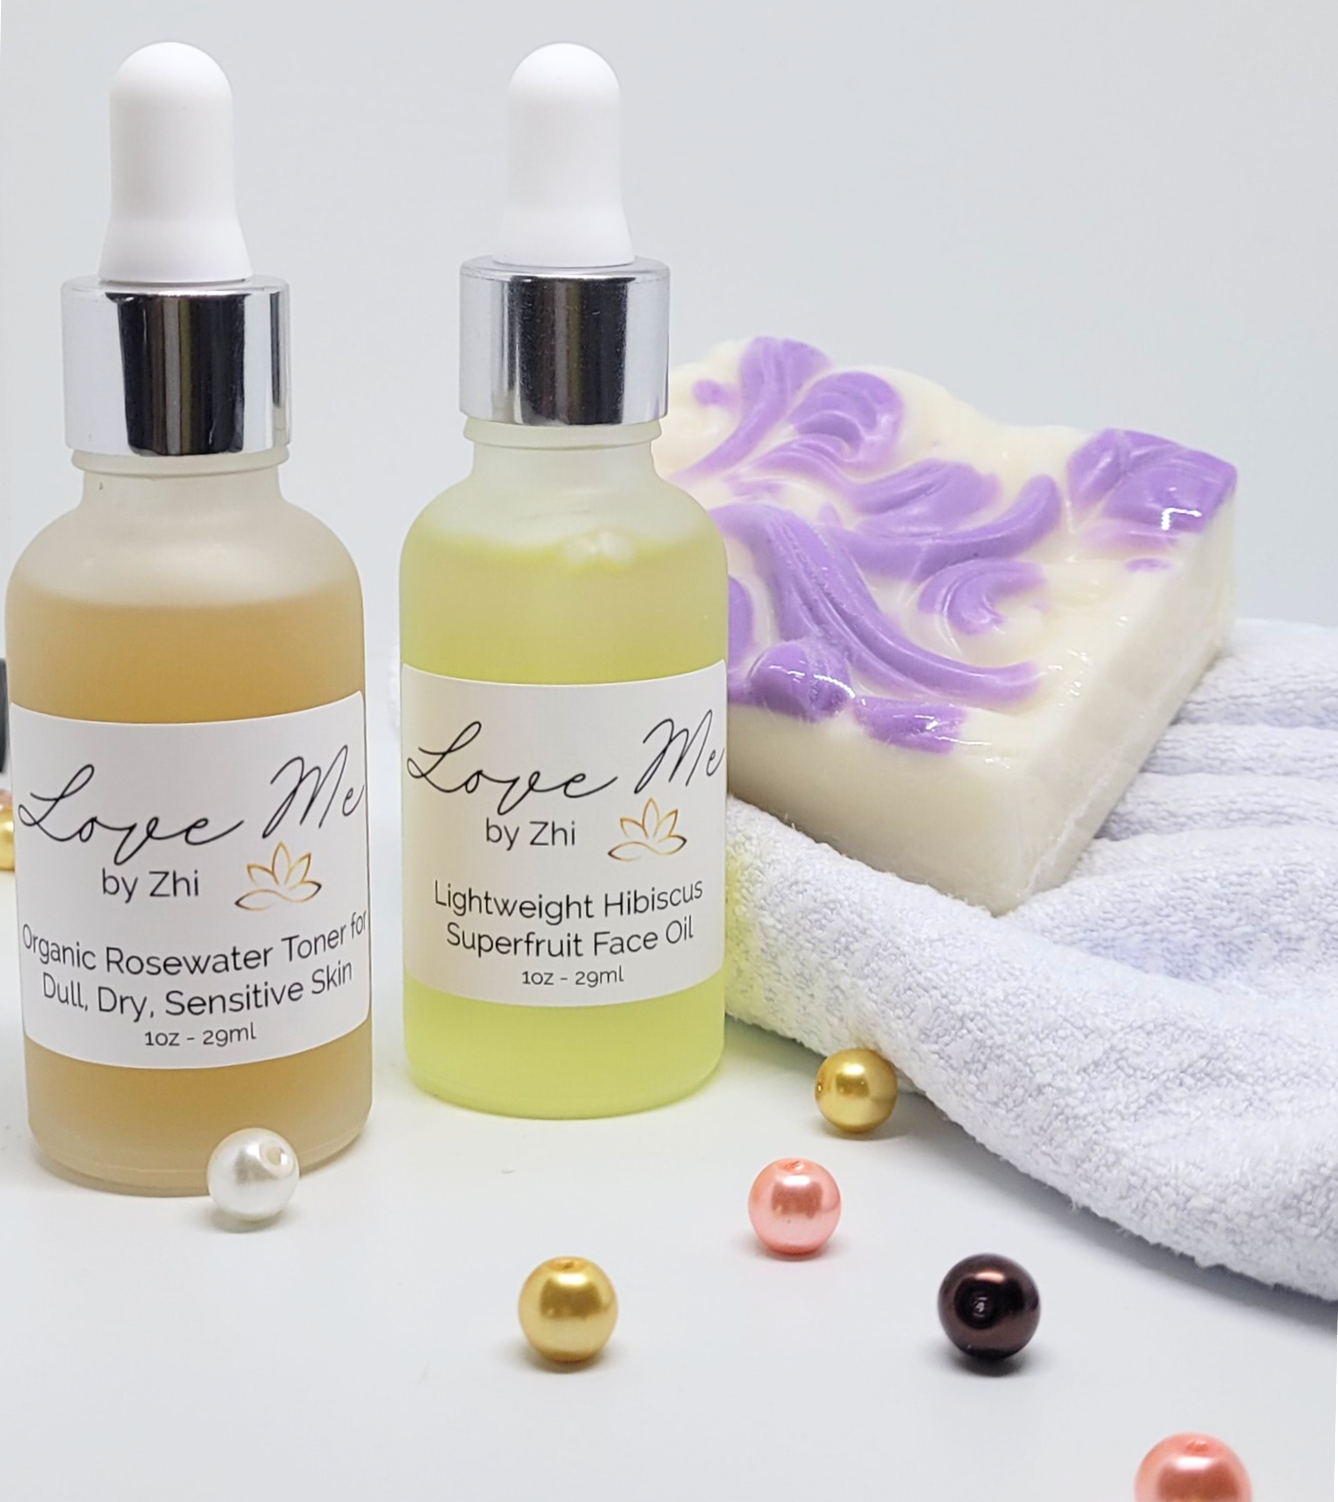 Love Me by Zhi Rosewater Toner